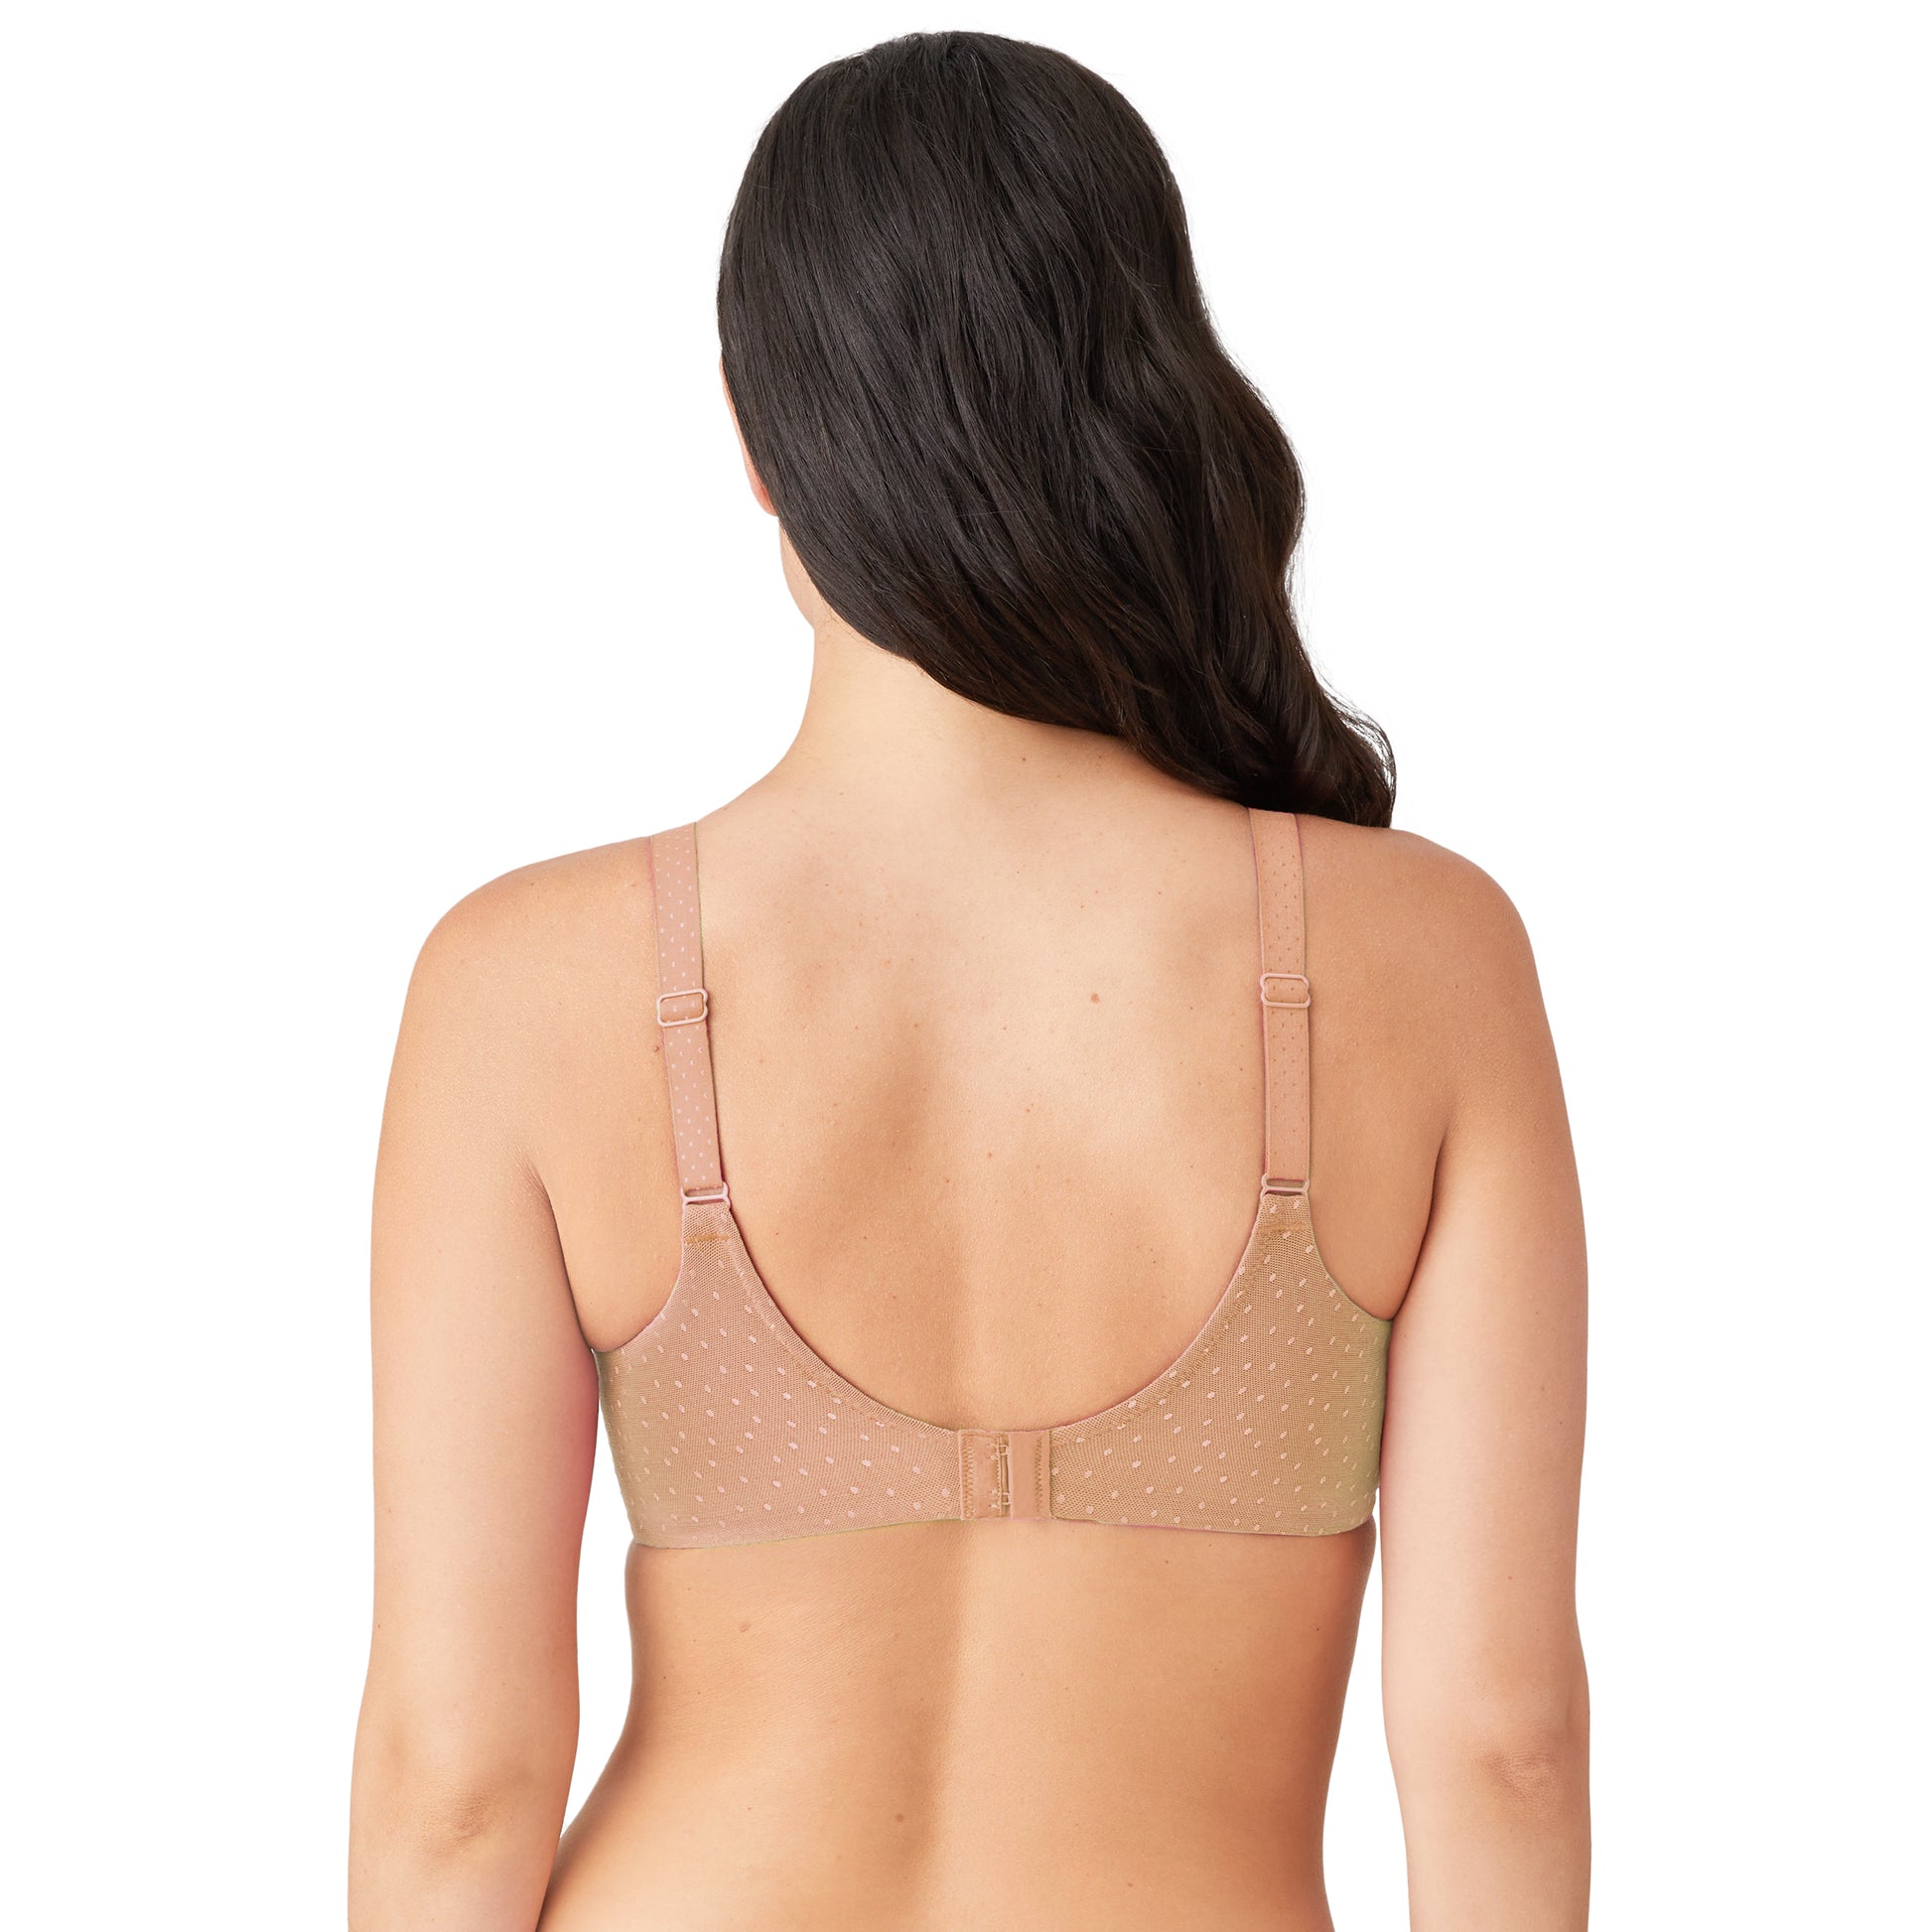 Back Appeal Full Coverage Underwire Bra - 855303 - Praline Bras & Lingerie - Bras - Underwire Bras Wacoal   